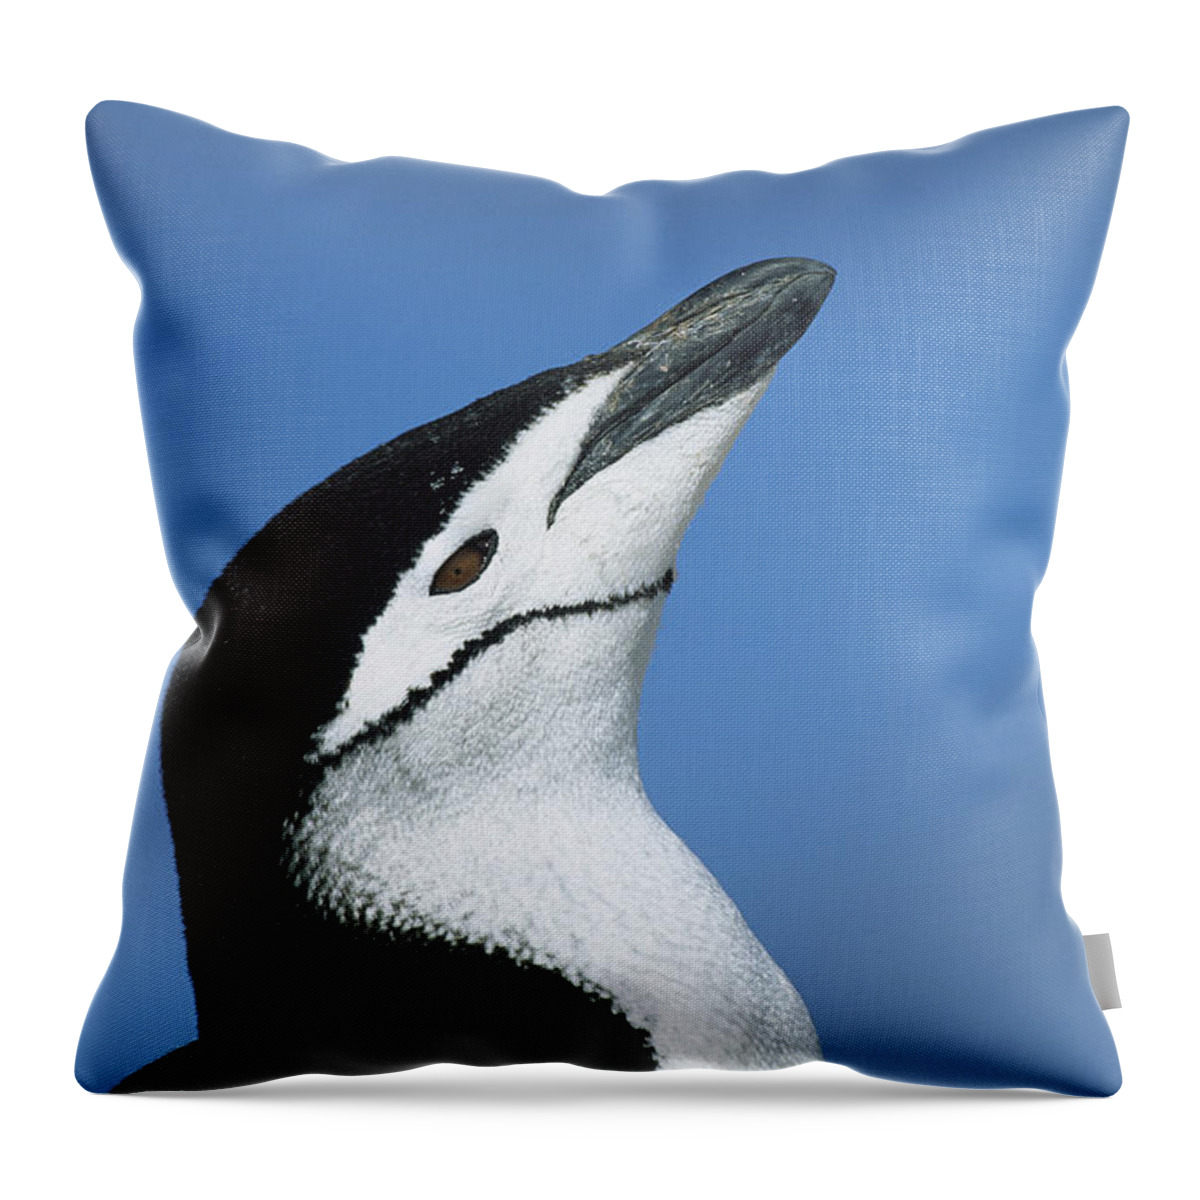 00260245 Throw Pillow featuring the photograph Chinstrap Penguin Adult Calling by Colin Monteath